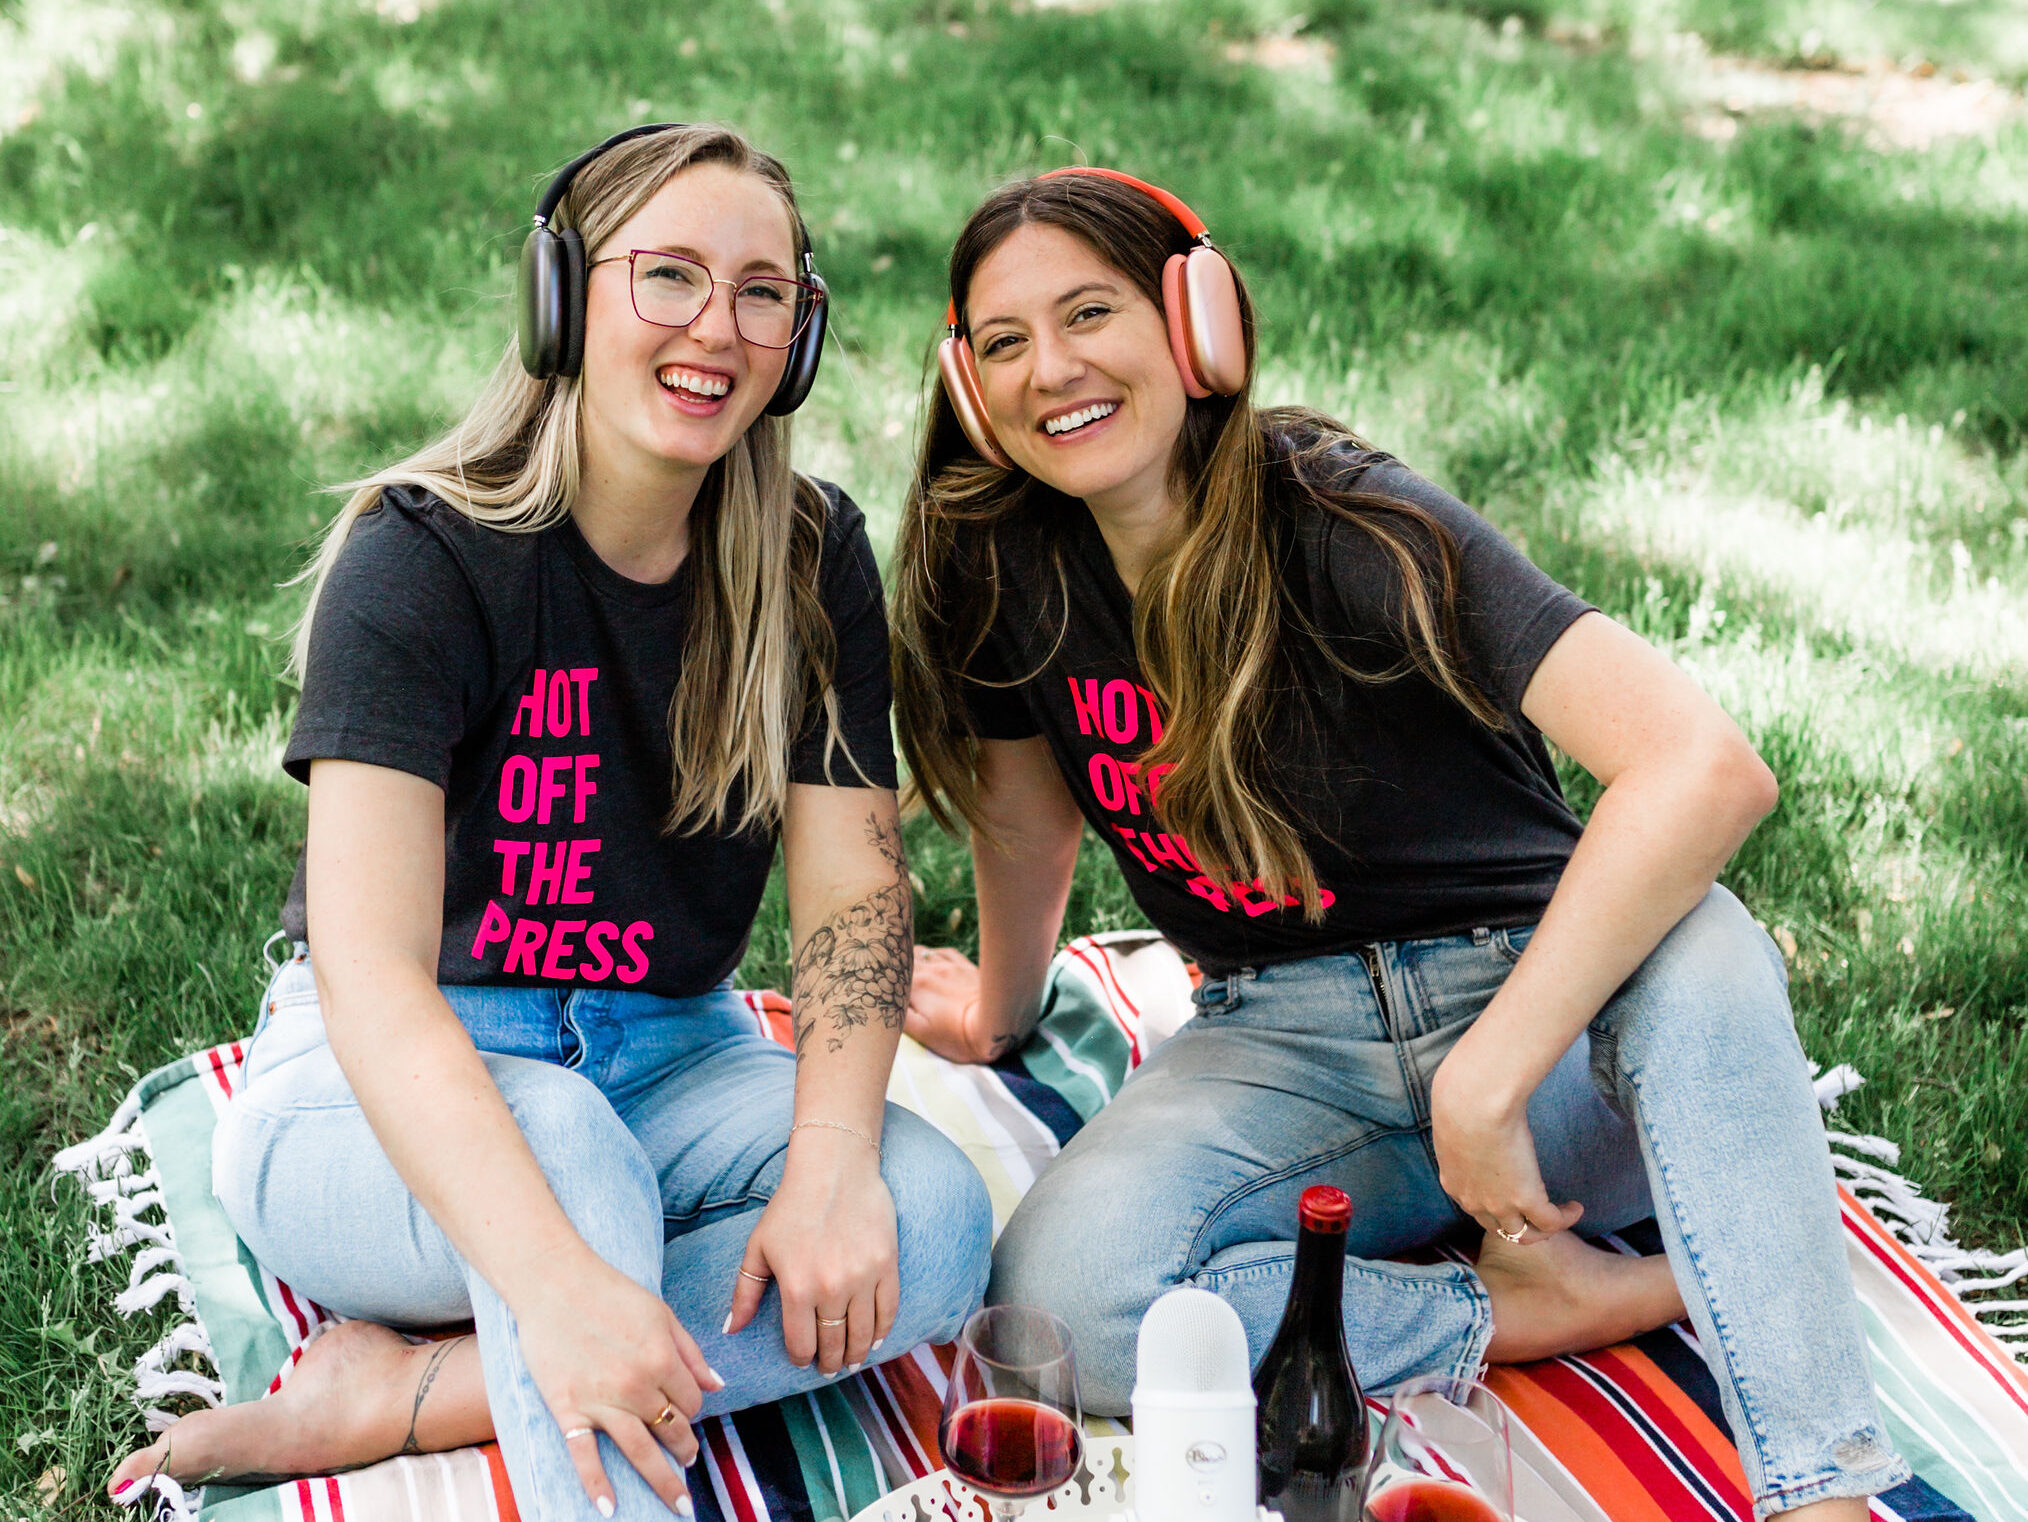 The friendly faces of your podcast hosts, Moriah and Jillian, sitting outside on a picnic blanket with their podcasting gear and their Hot Off the Press branded shirts. 